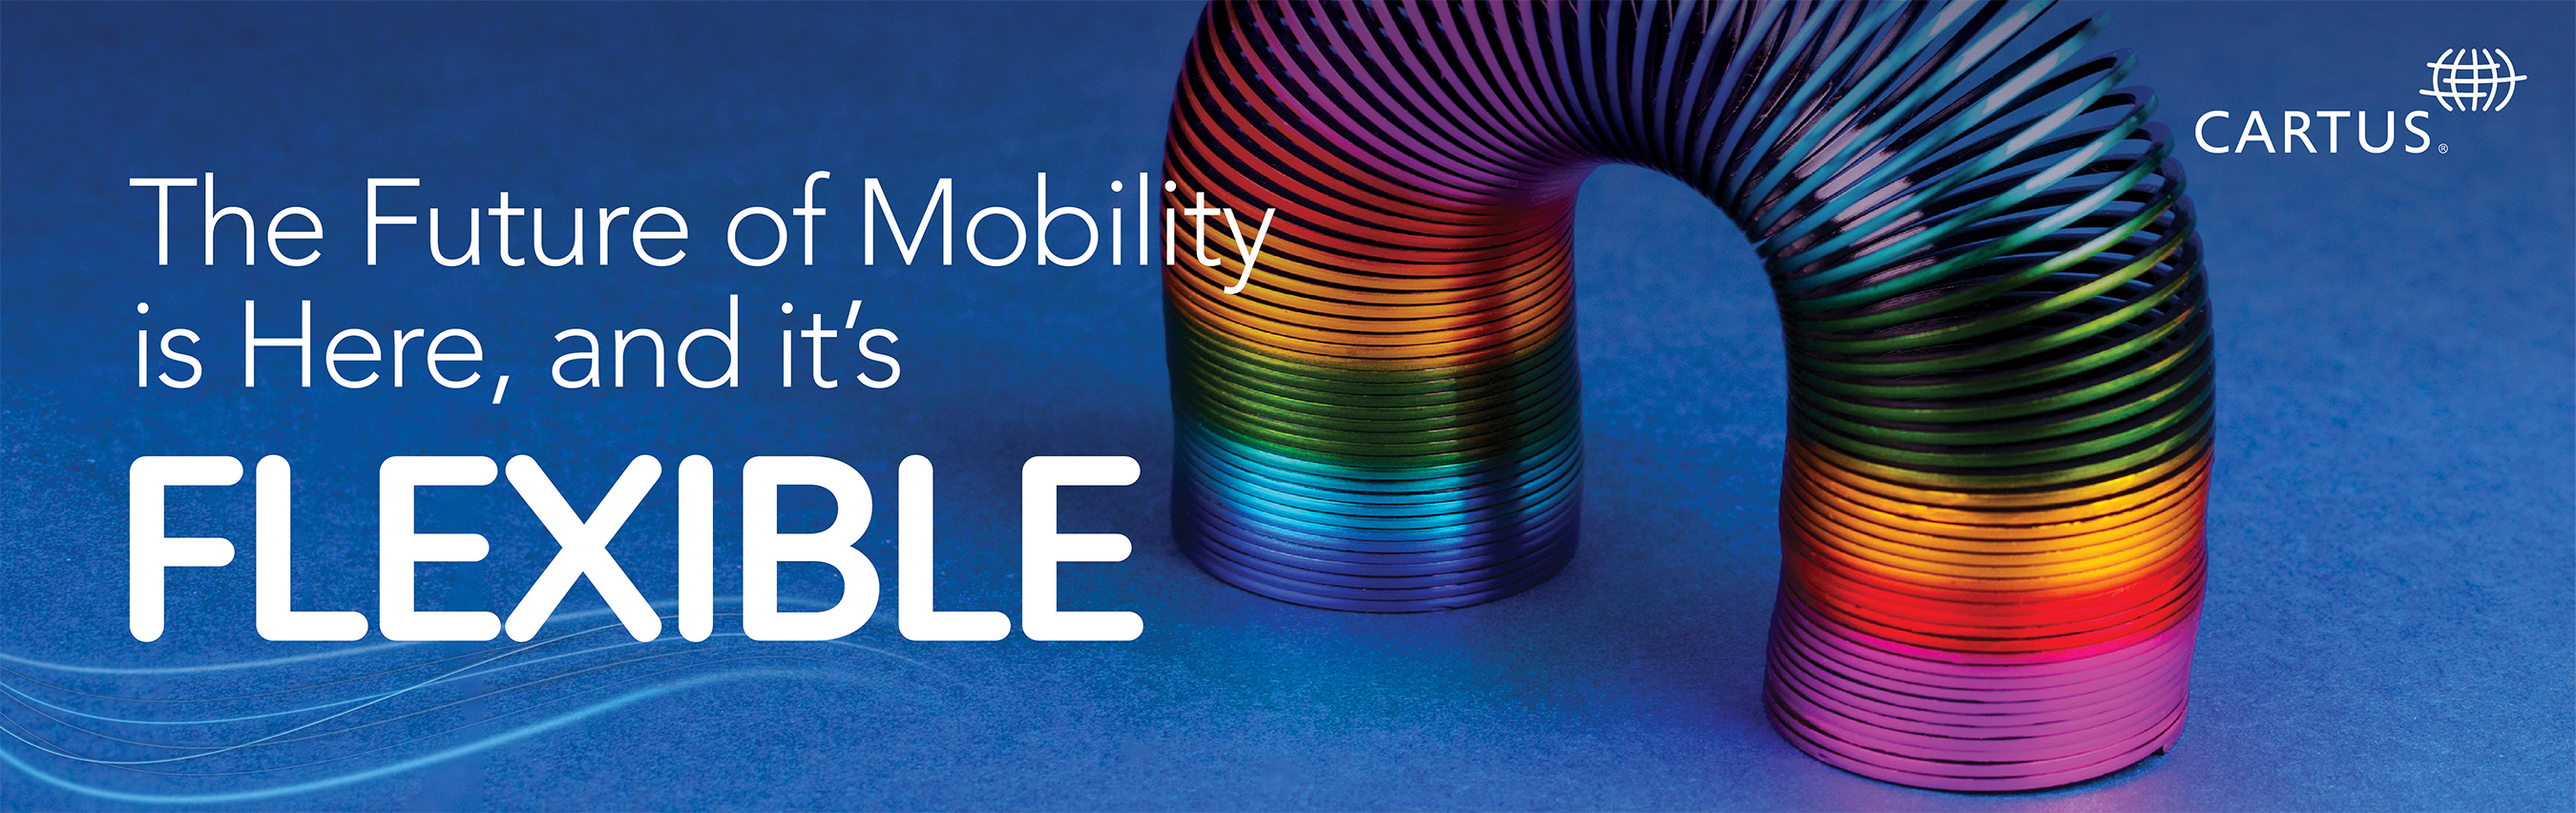 The Future of Mobility is Here, and it's Flexible.